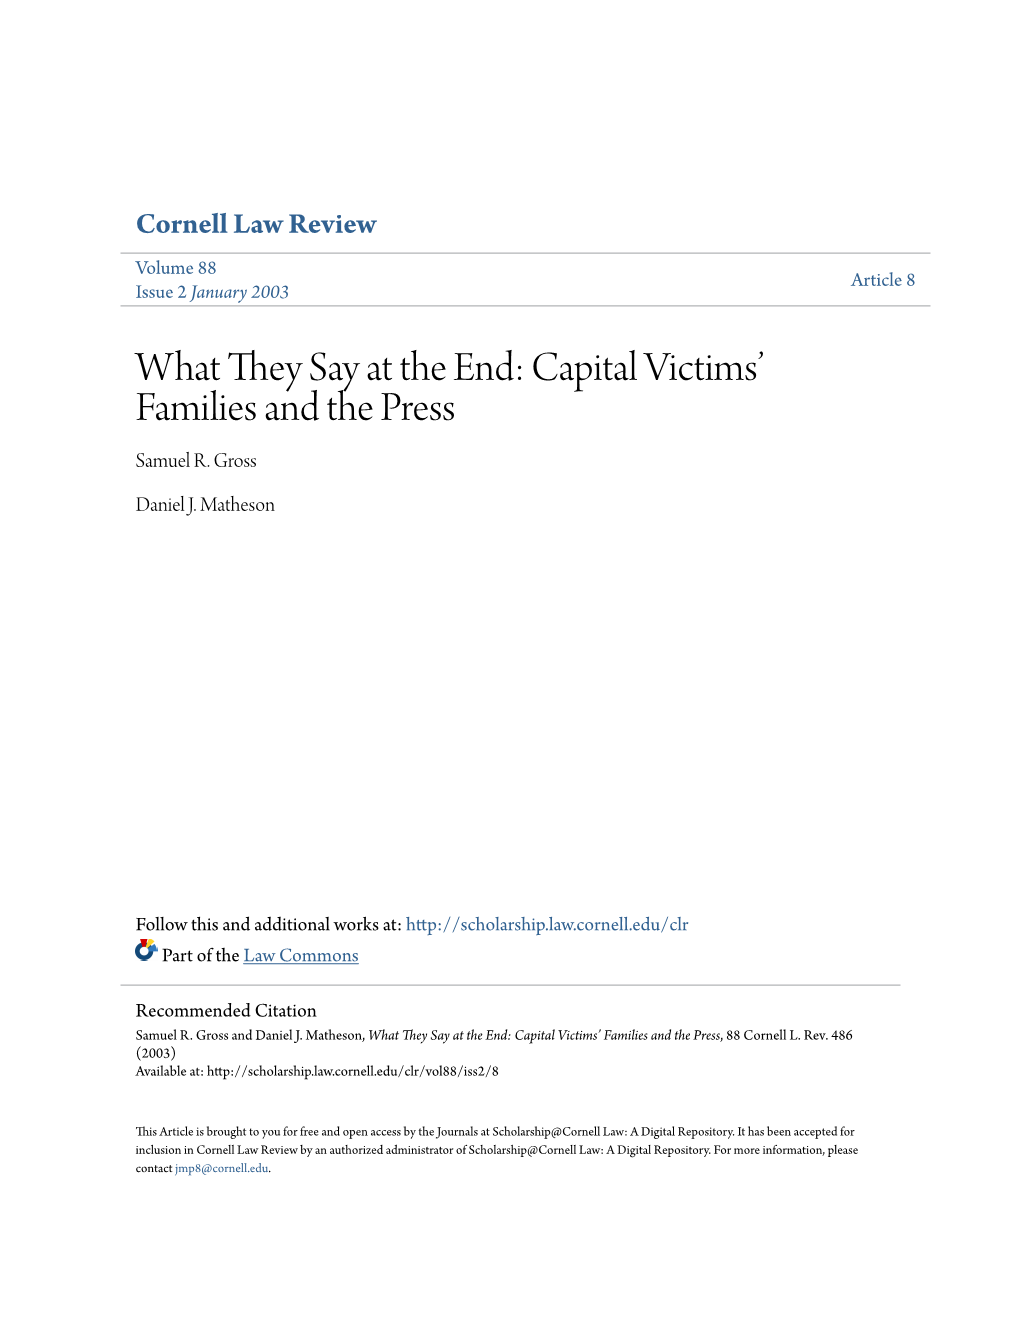 What They Say at the End: Capital Victims' Families and the Press